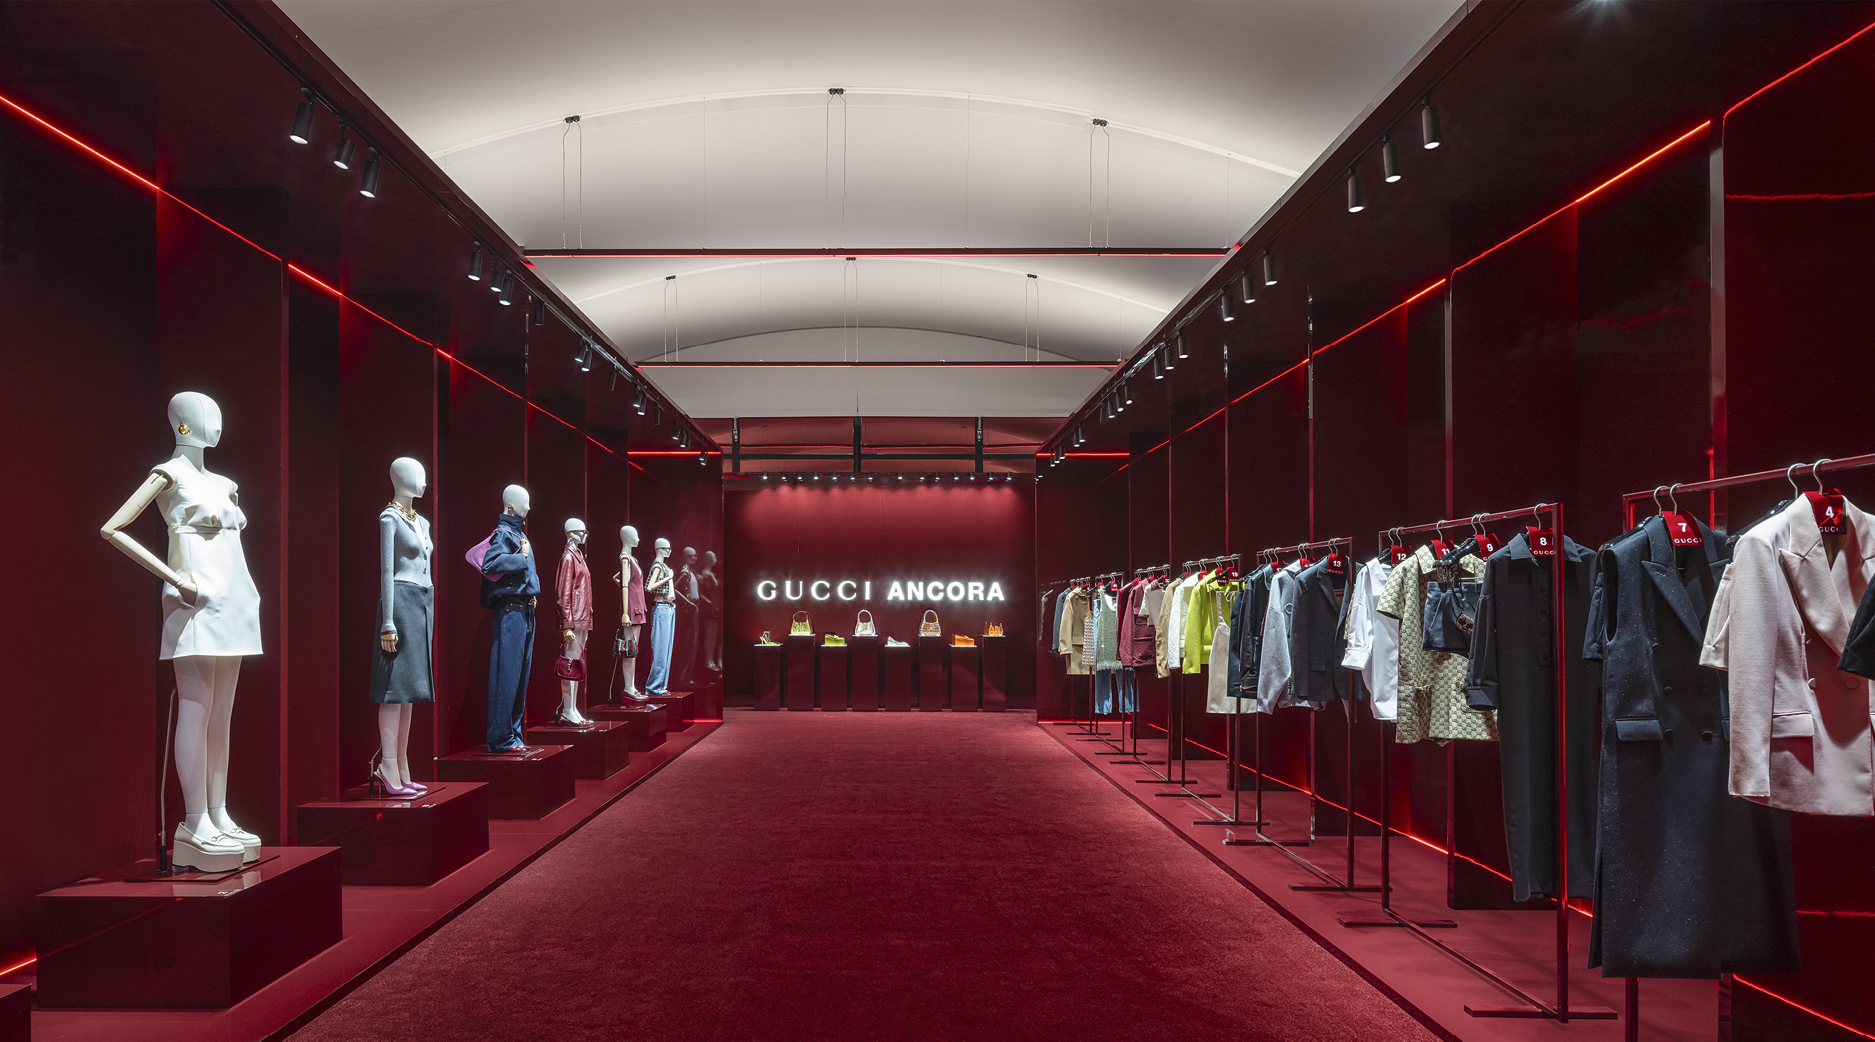 Gucci's new Ancora collection makes its debut in Asia